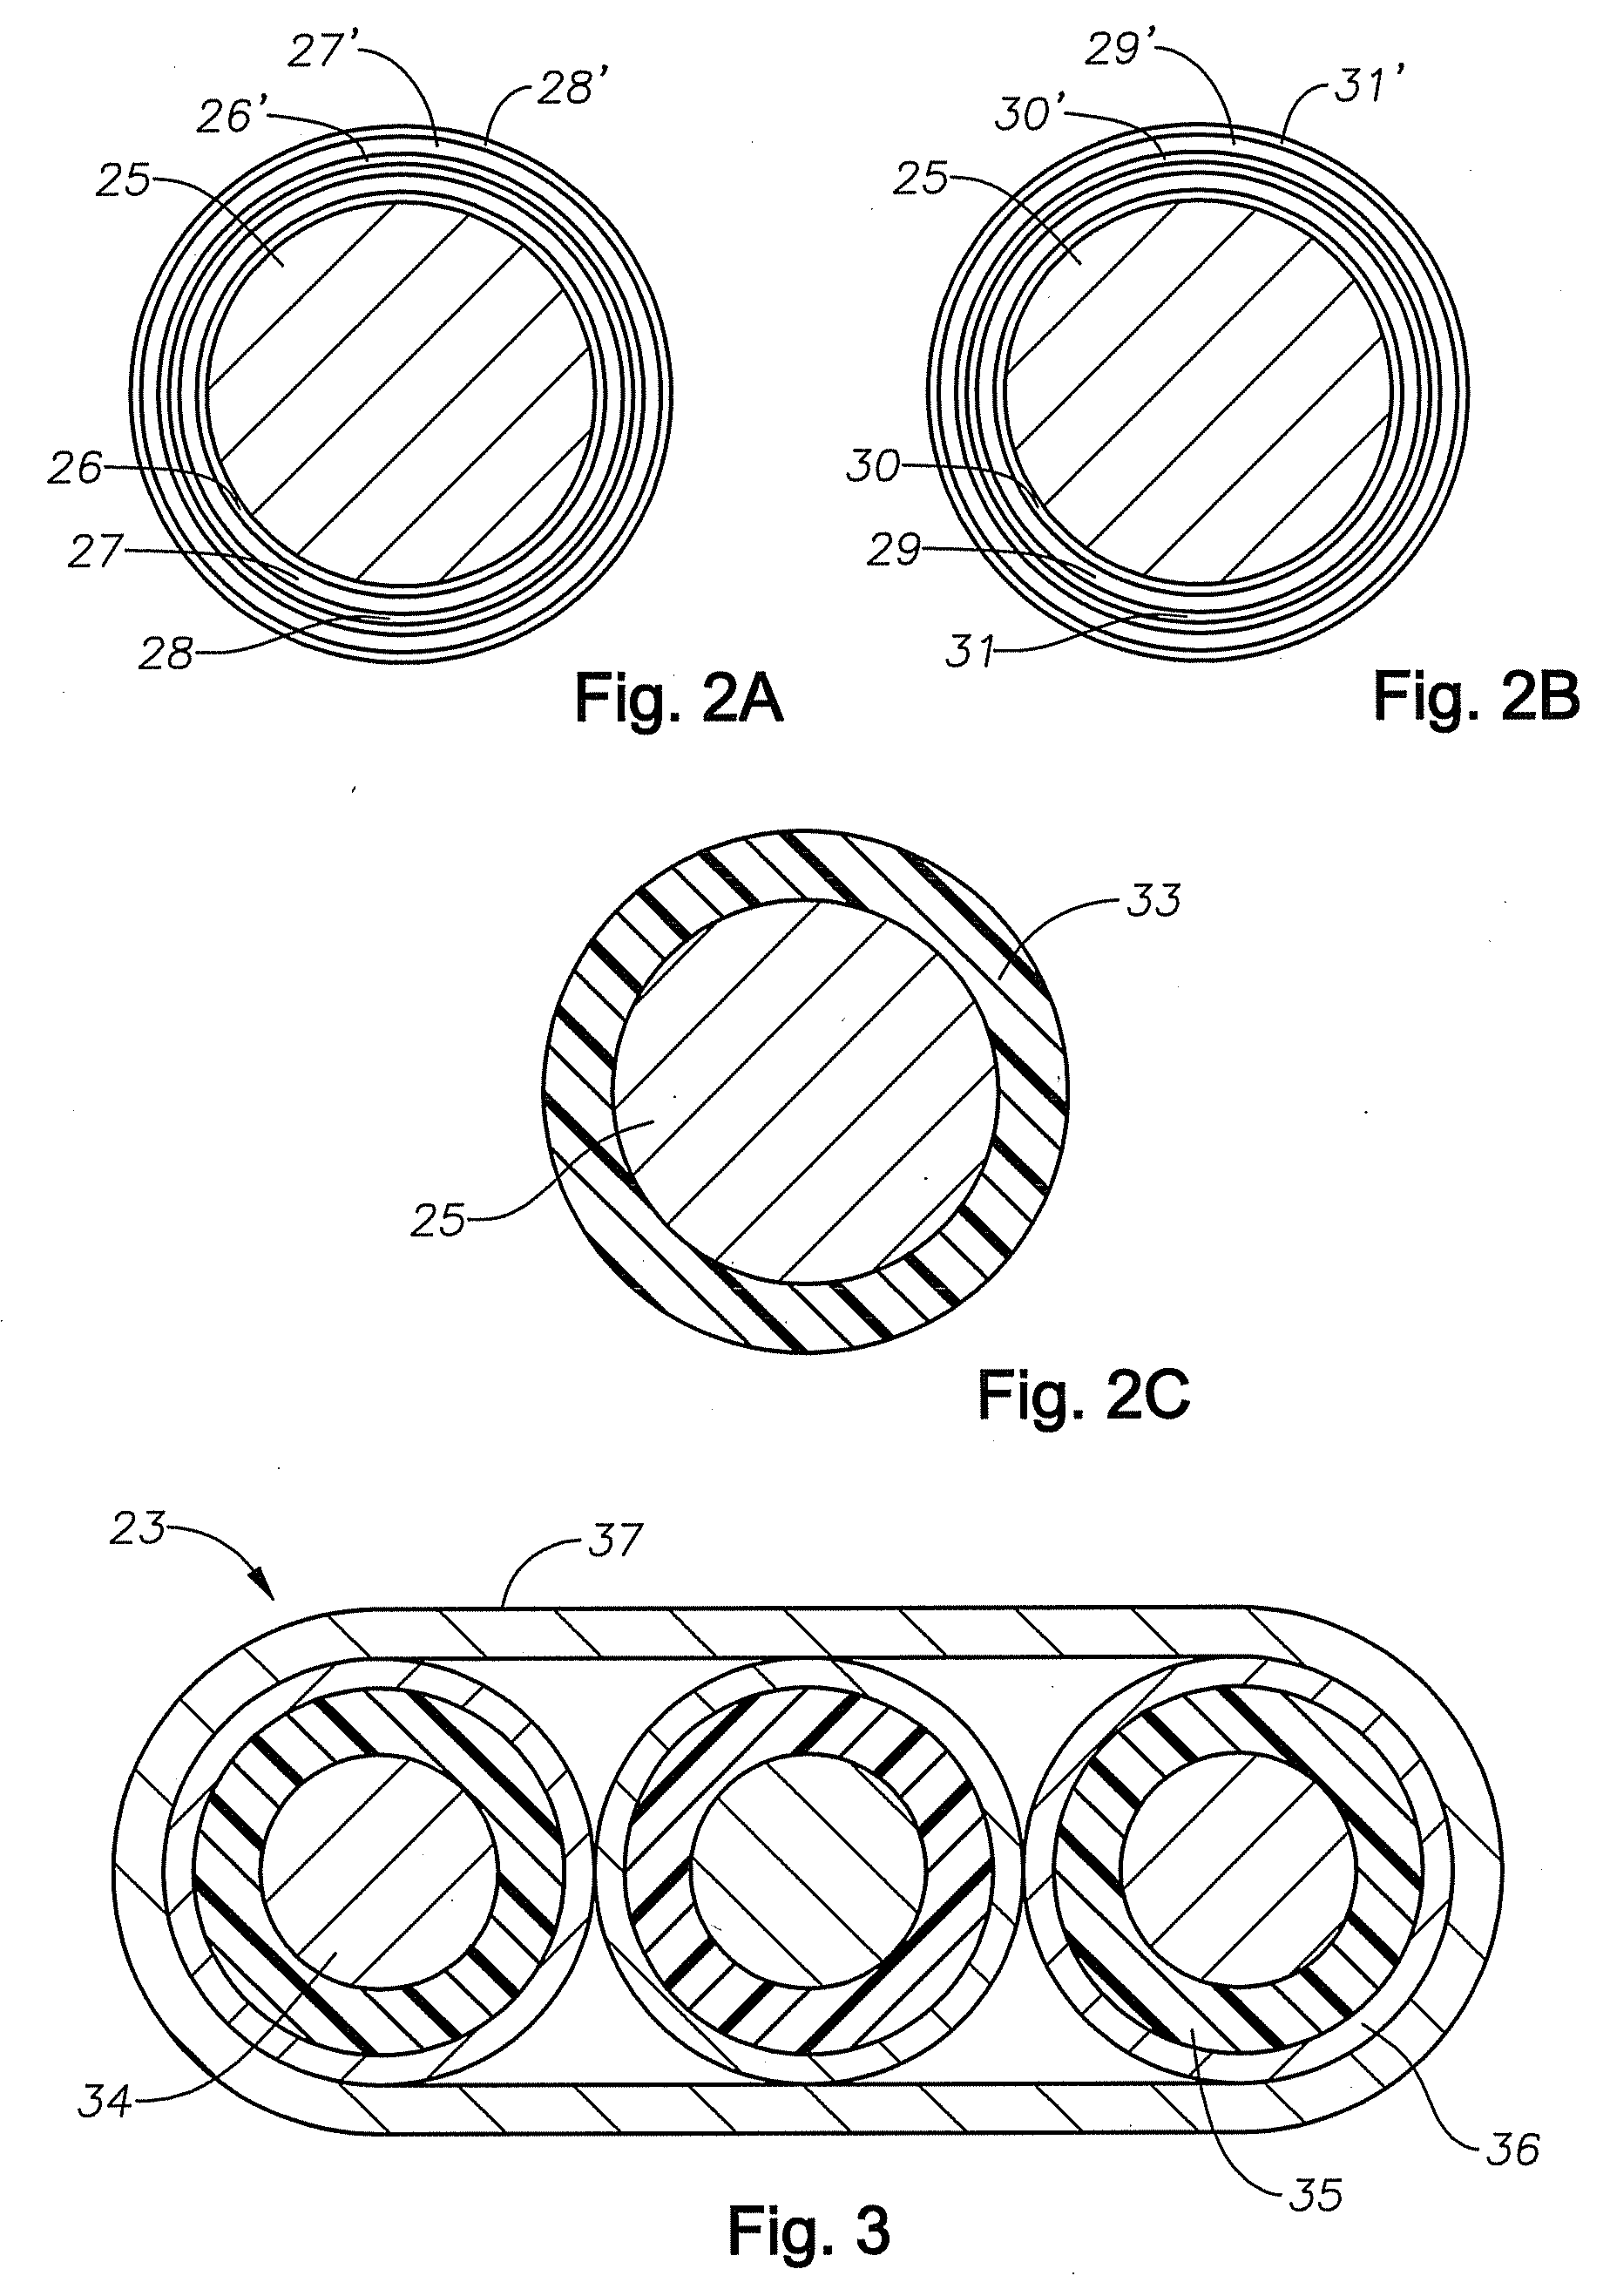 Electrical Submersible Pump System Having High Temperature Insulation Materials